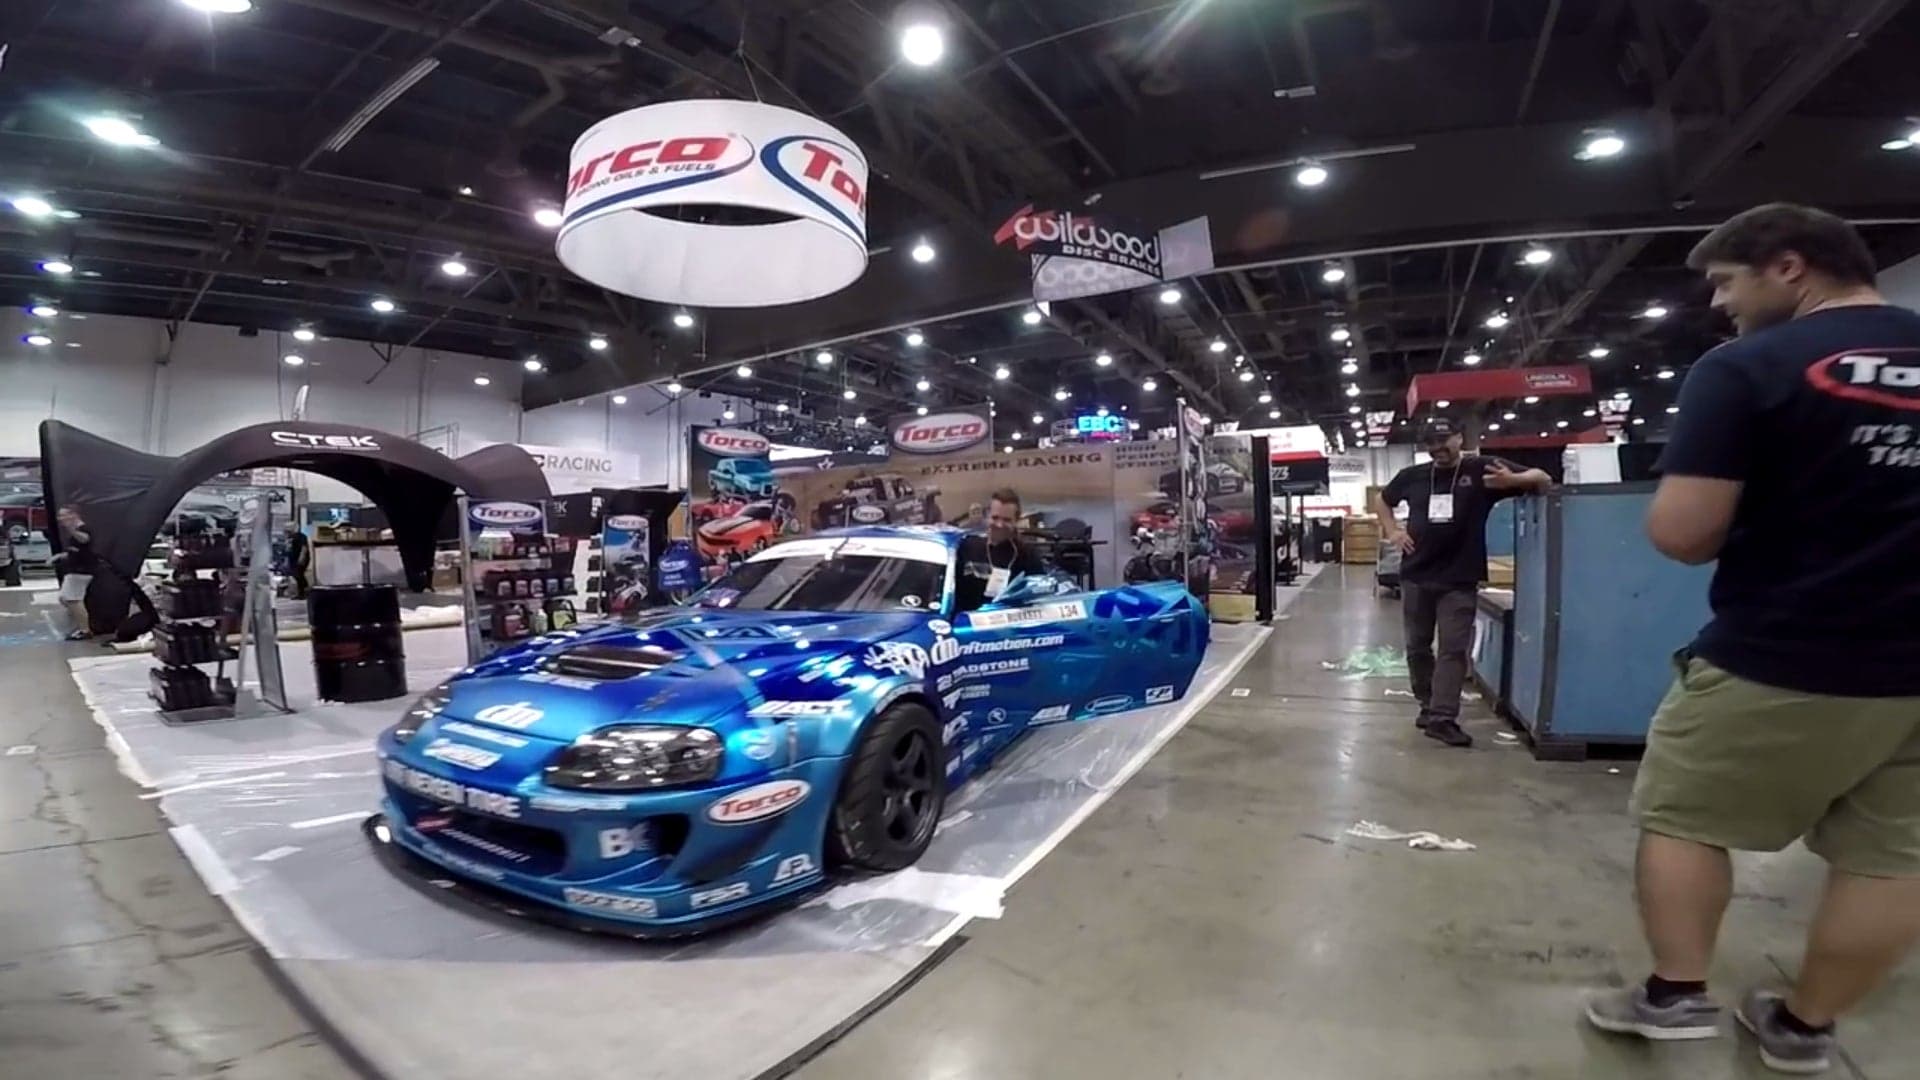 Take a Look at What It Is Like to Have A Car Featured at SEMA